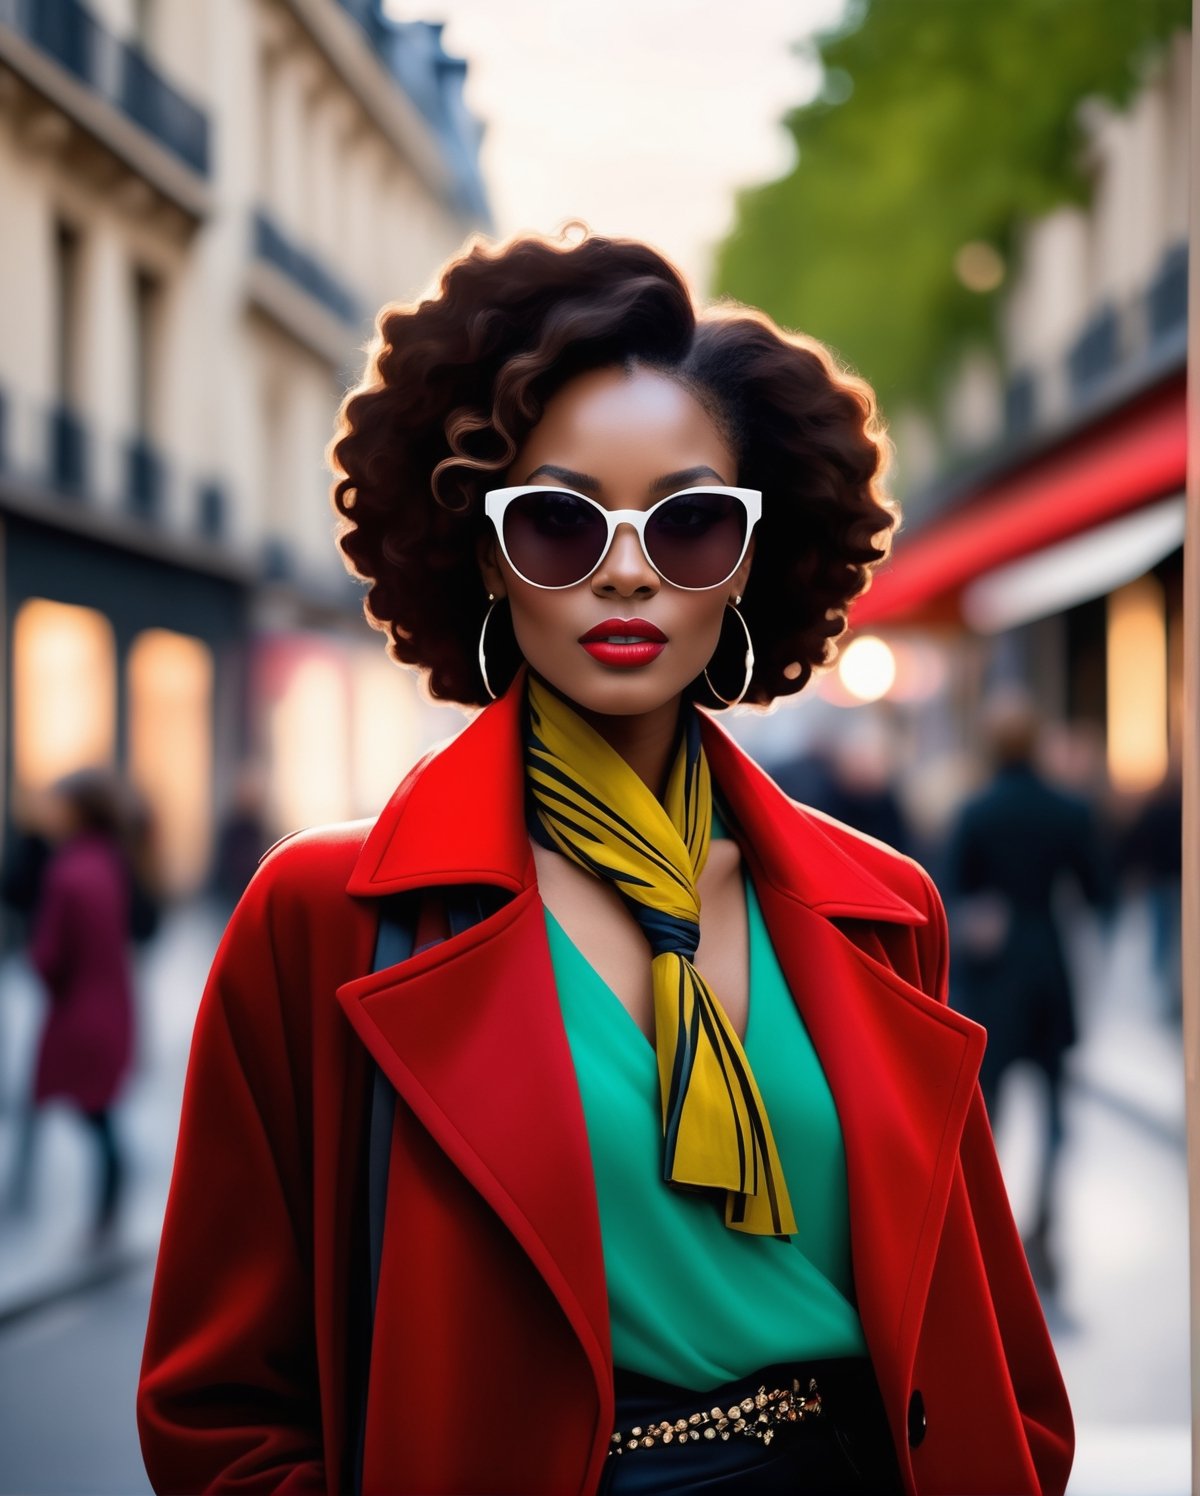 A stunning, photorealistic portrait of a stylish black woman, captured in the dusk light of a bustling Parisian street. She is dressed in a chic ensemble, with a vibrant red coat and a fashionable scarf, accessorized with elegant sunglasses. Her long, curly hair cascades down her shoulders, framing her confident and poised face. The urban backdrop of Paris, with its architectural marvels and warm streetlights, adds a touch of European charm to the image.